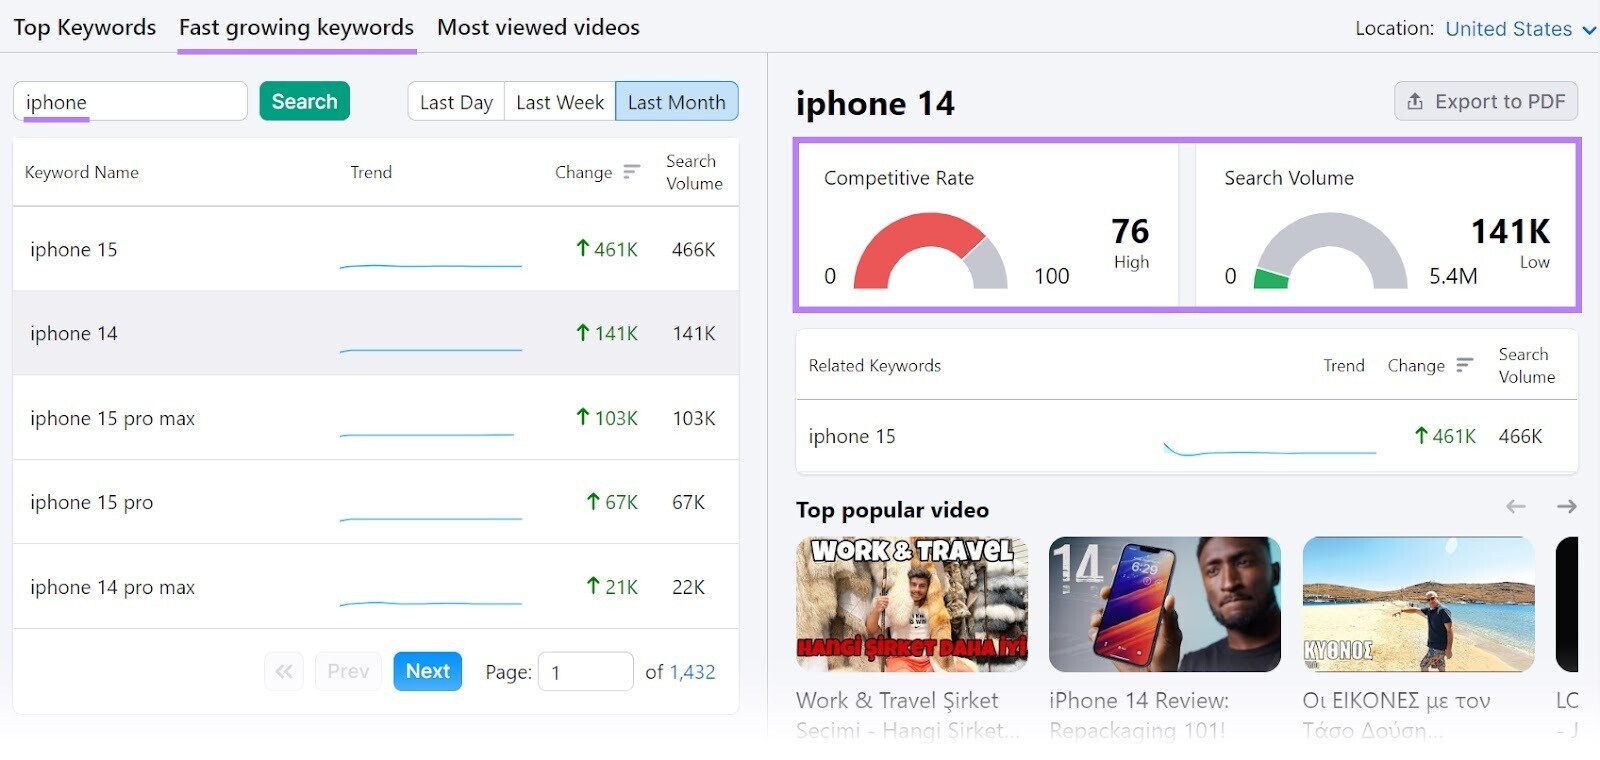 Results for "iphone 14" in Keyword Analytics for YouTube